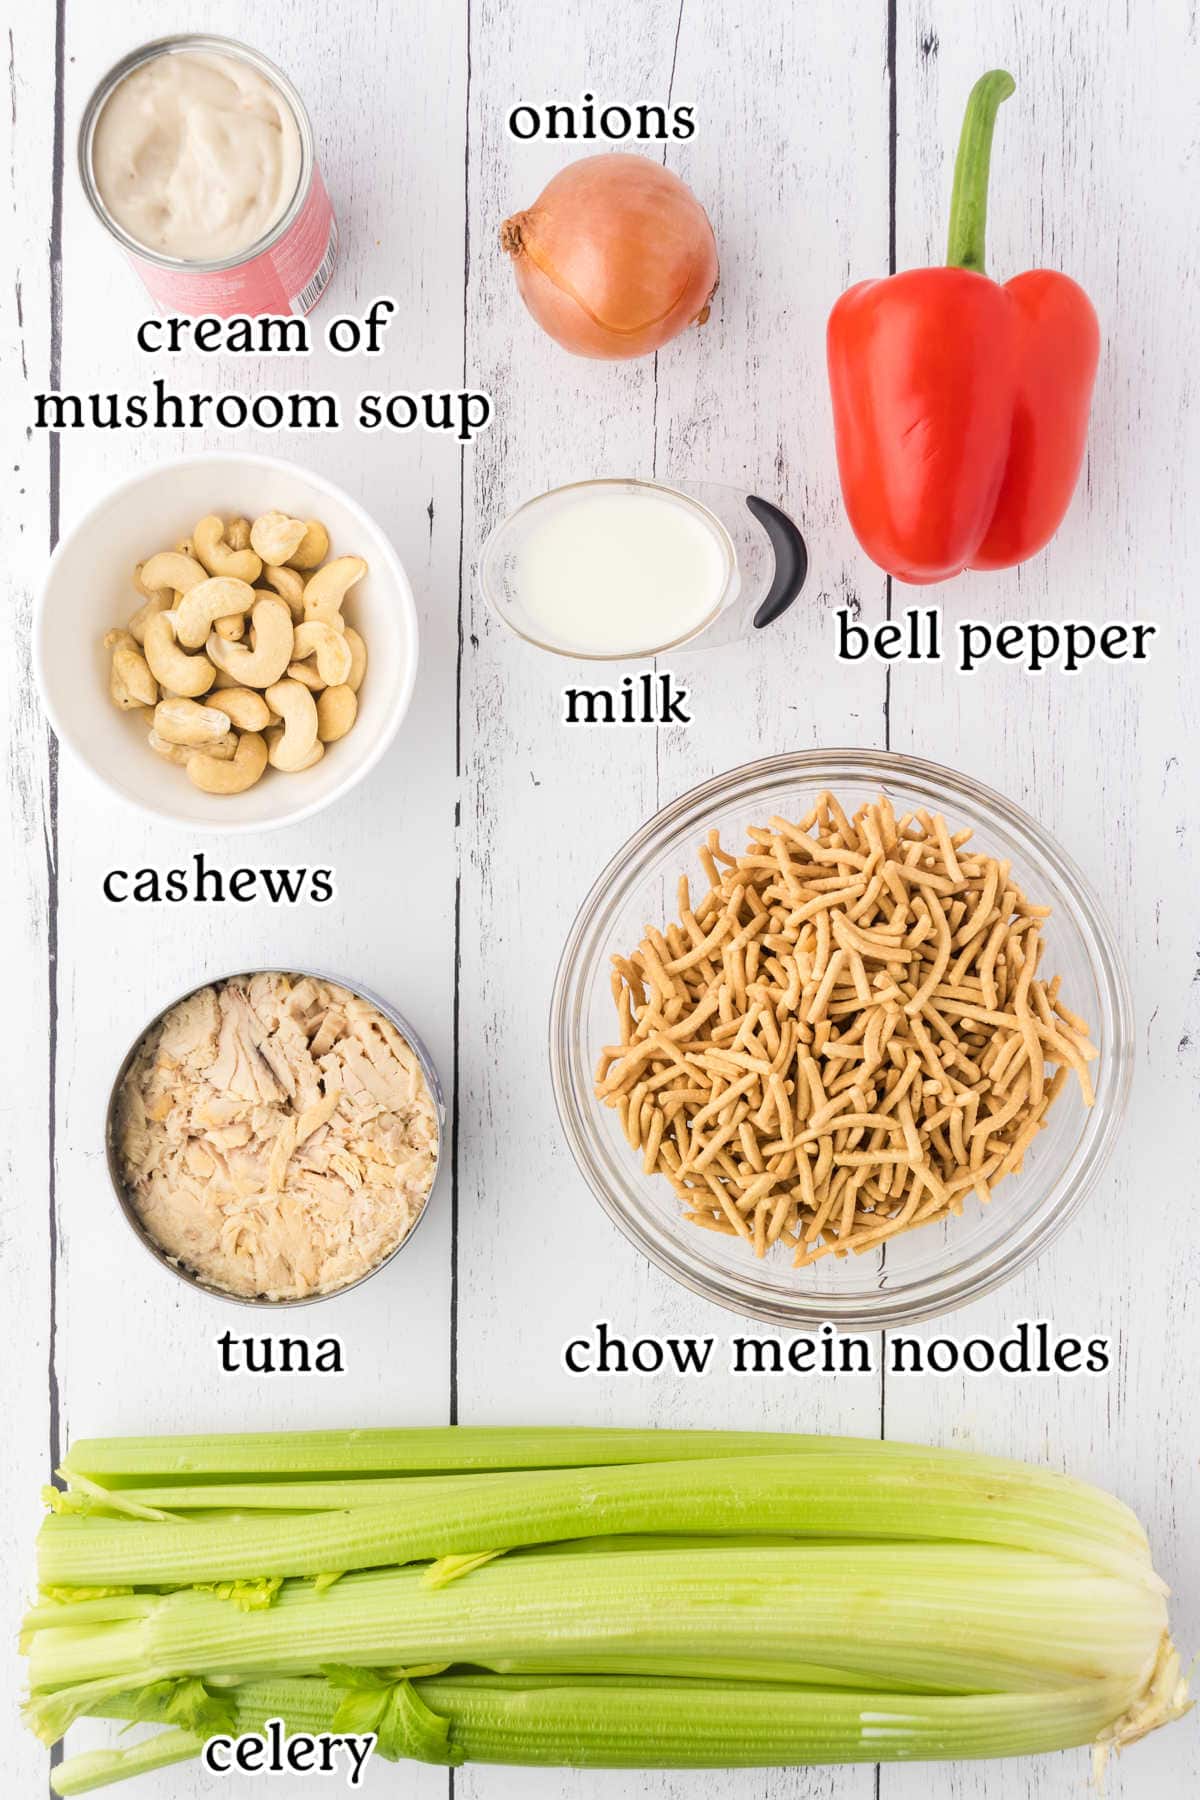 An overhead view of the recipe ingredients with text overlay.